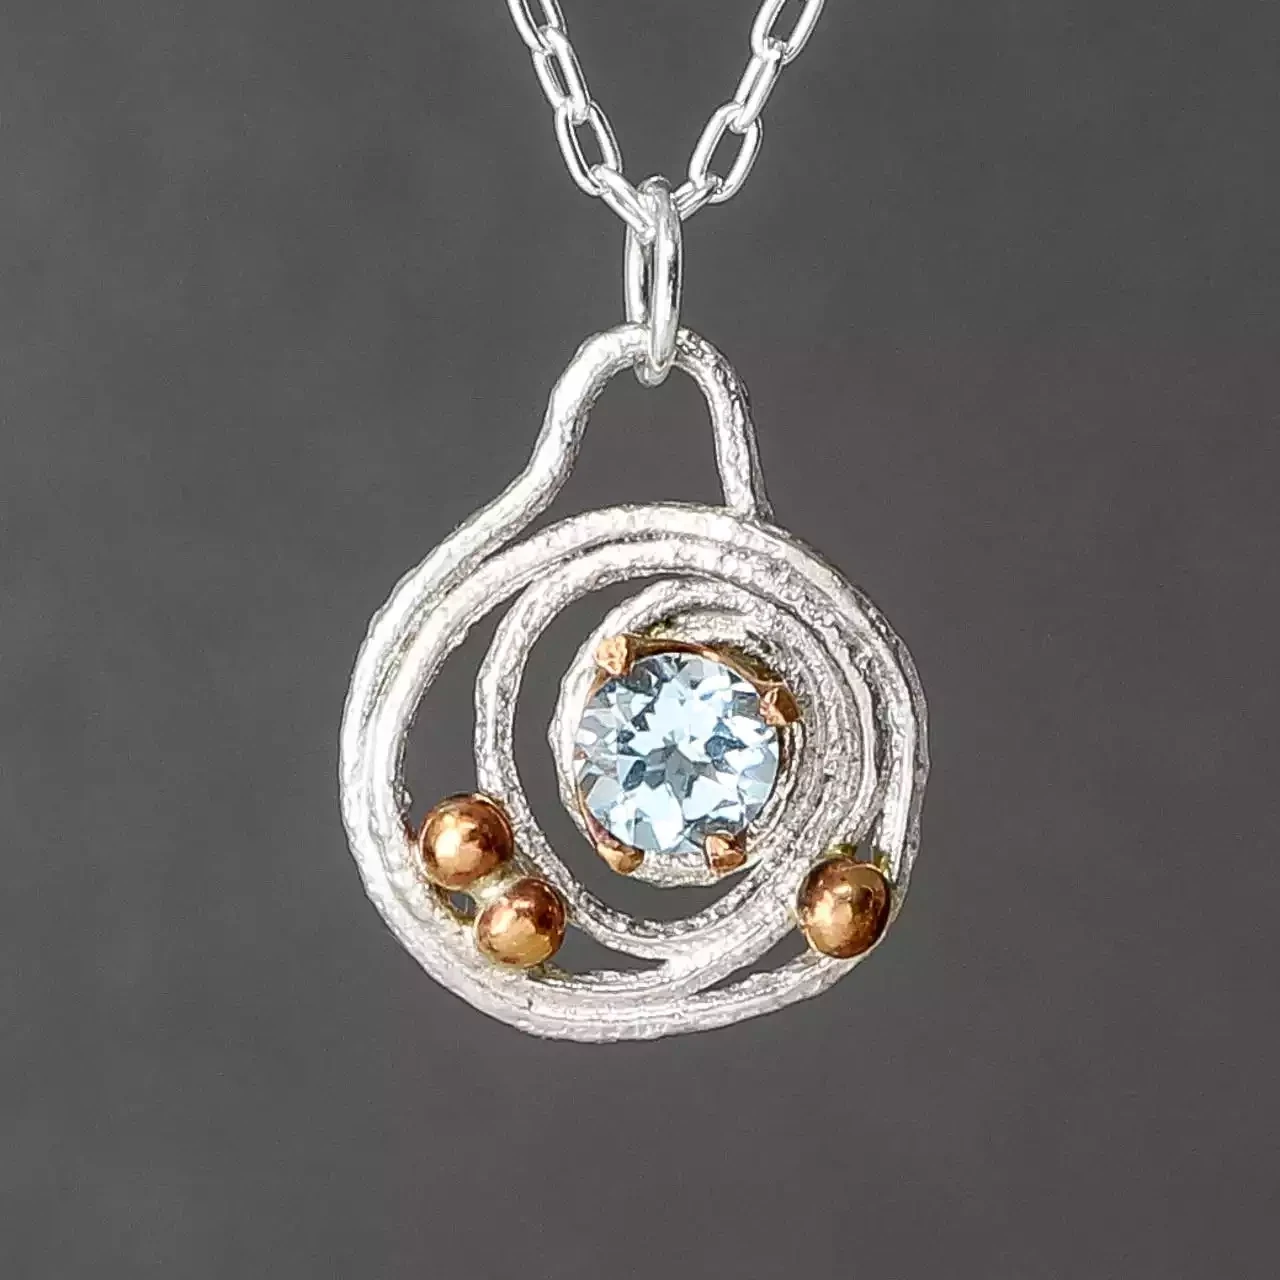 Bejewelled Squiggle Topaz, Silver and Bronze Pendant by Xuella Arnold